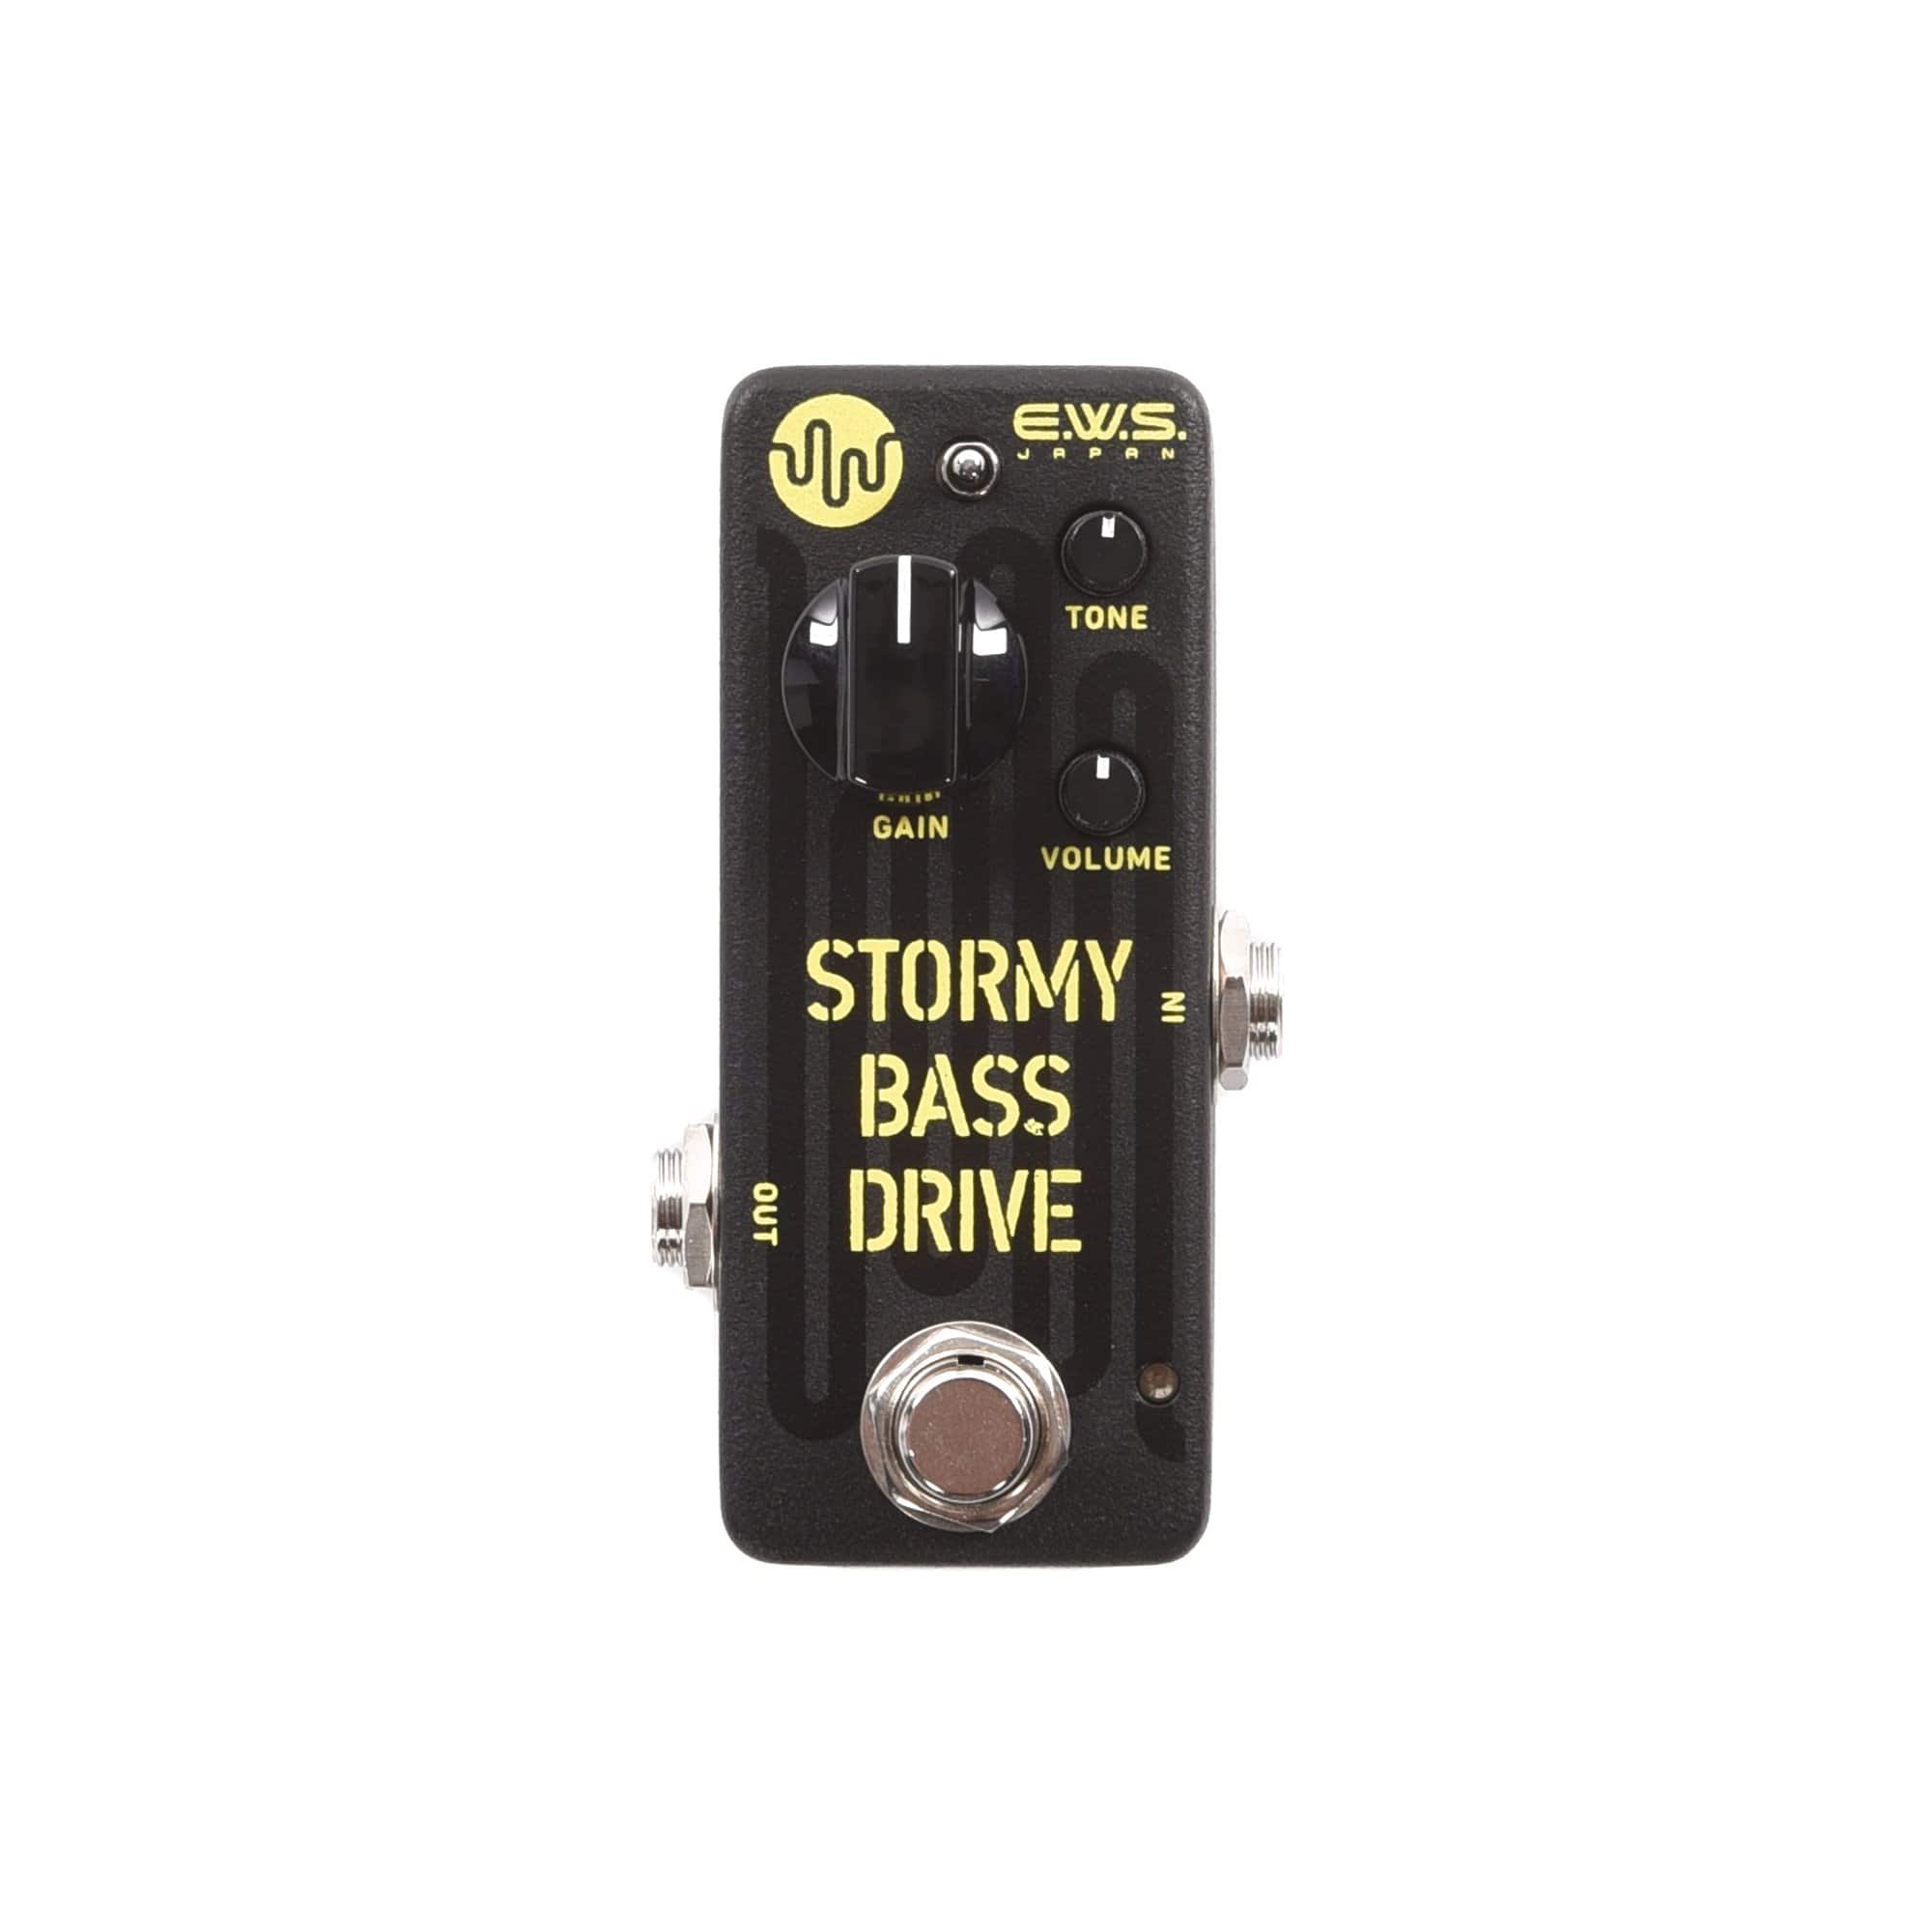 Stormy Bass Drive